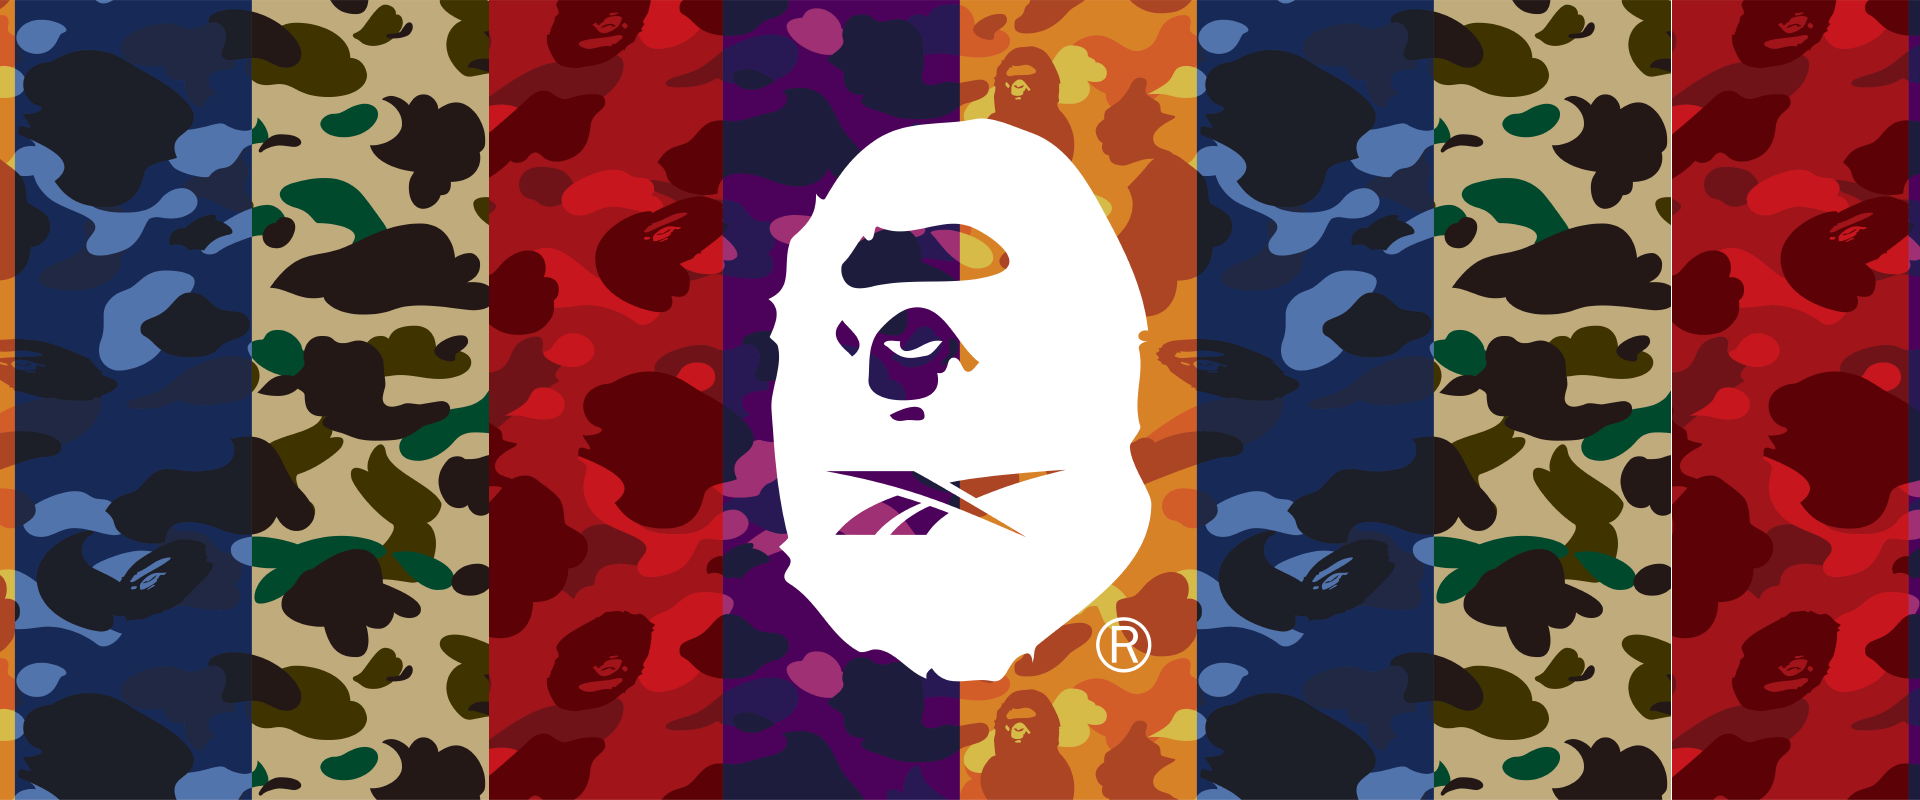 BAPE-ON-SITE-BANNERS_1920X800-01